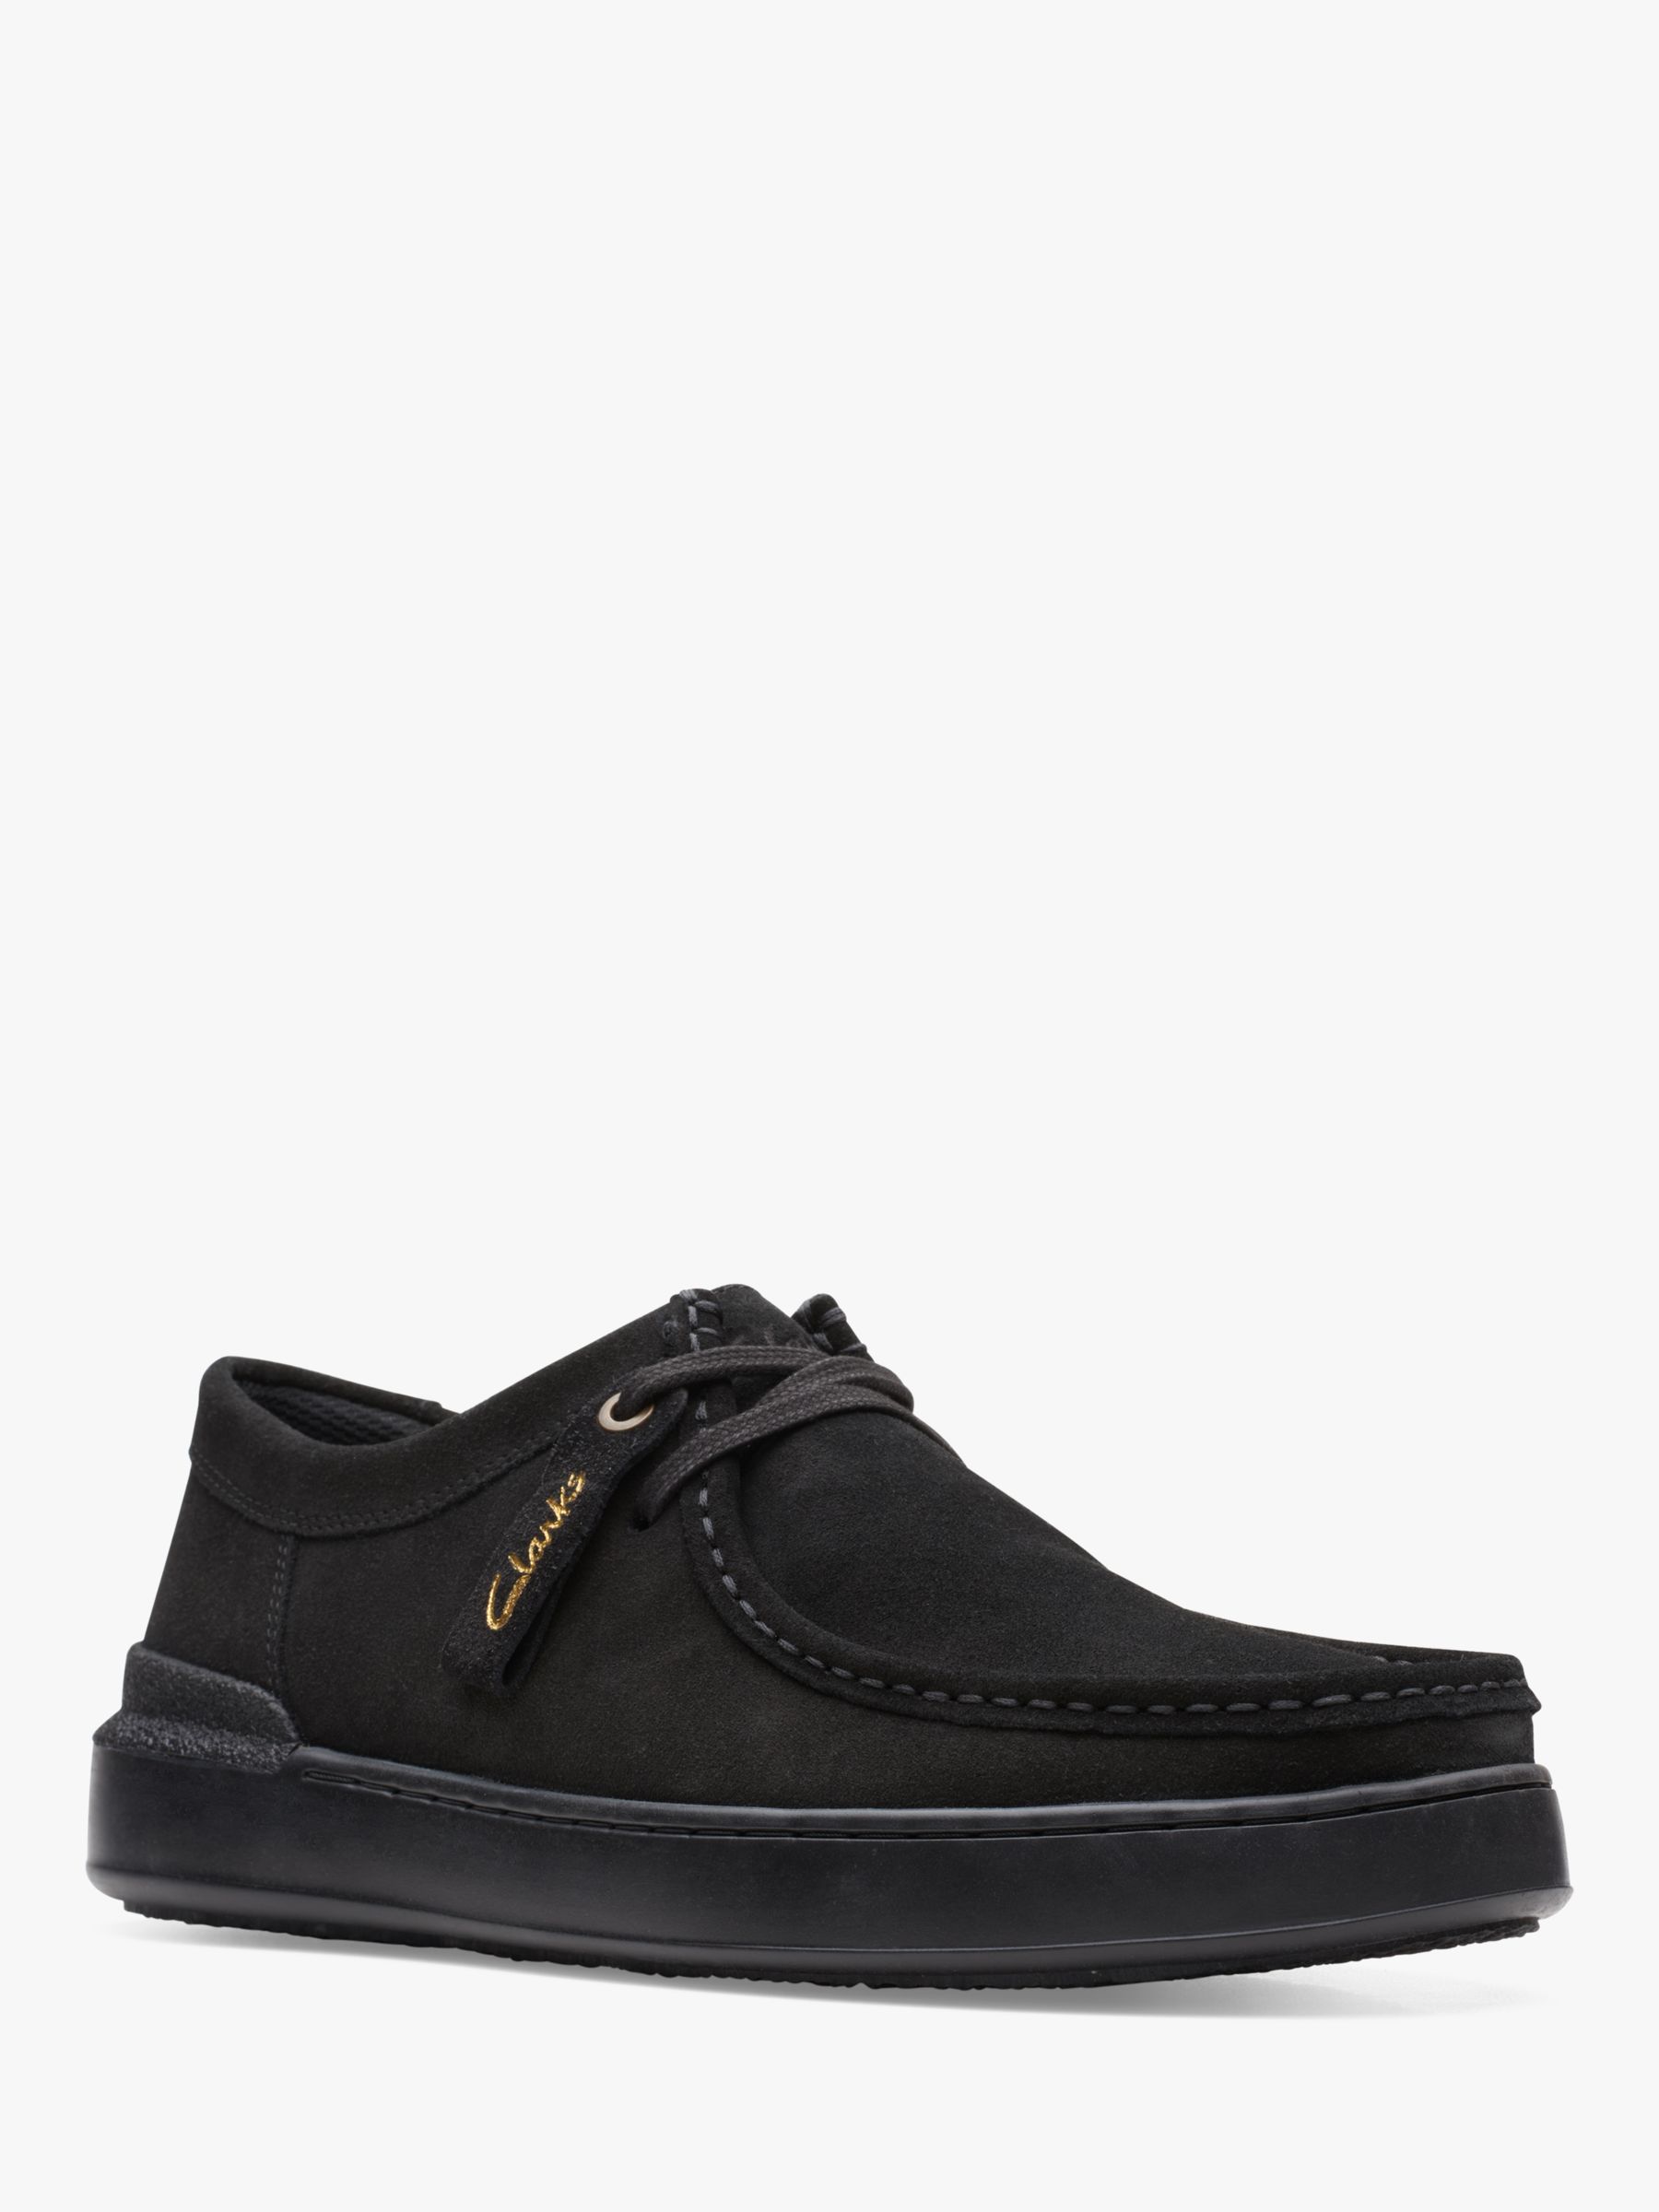 Clarks CourtLite Wally Suede Lace Up Trainers, All Black at John Lewis ...